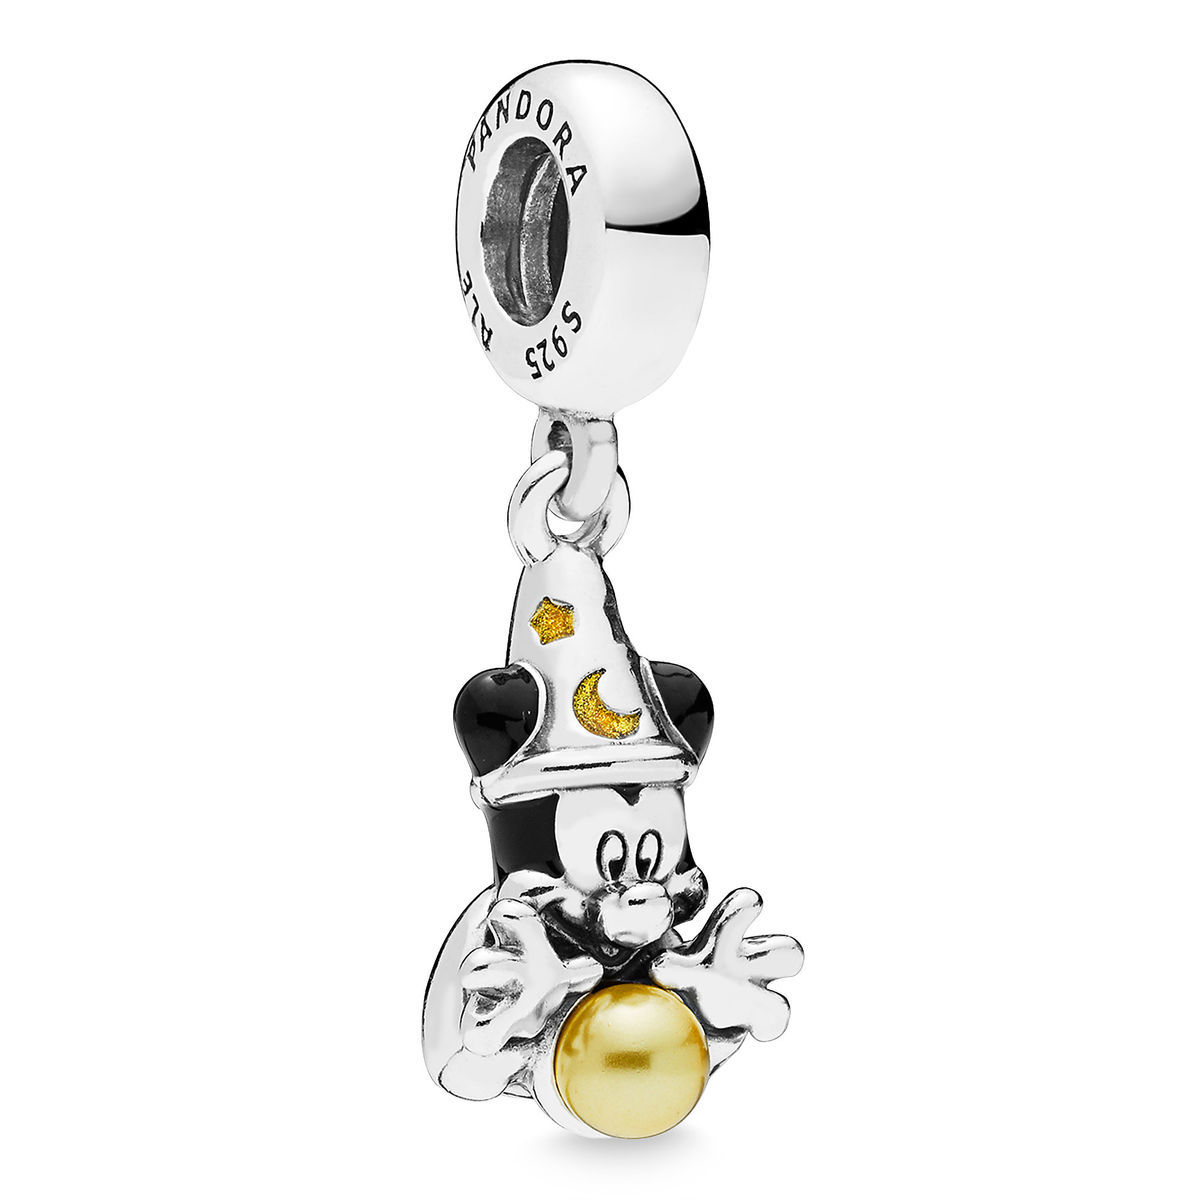 New Disney PANDORA Charms Out Now